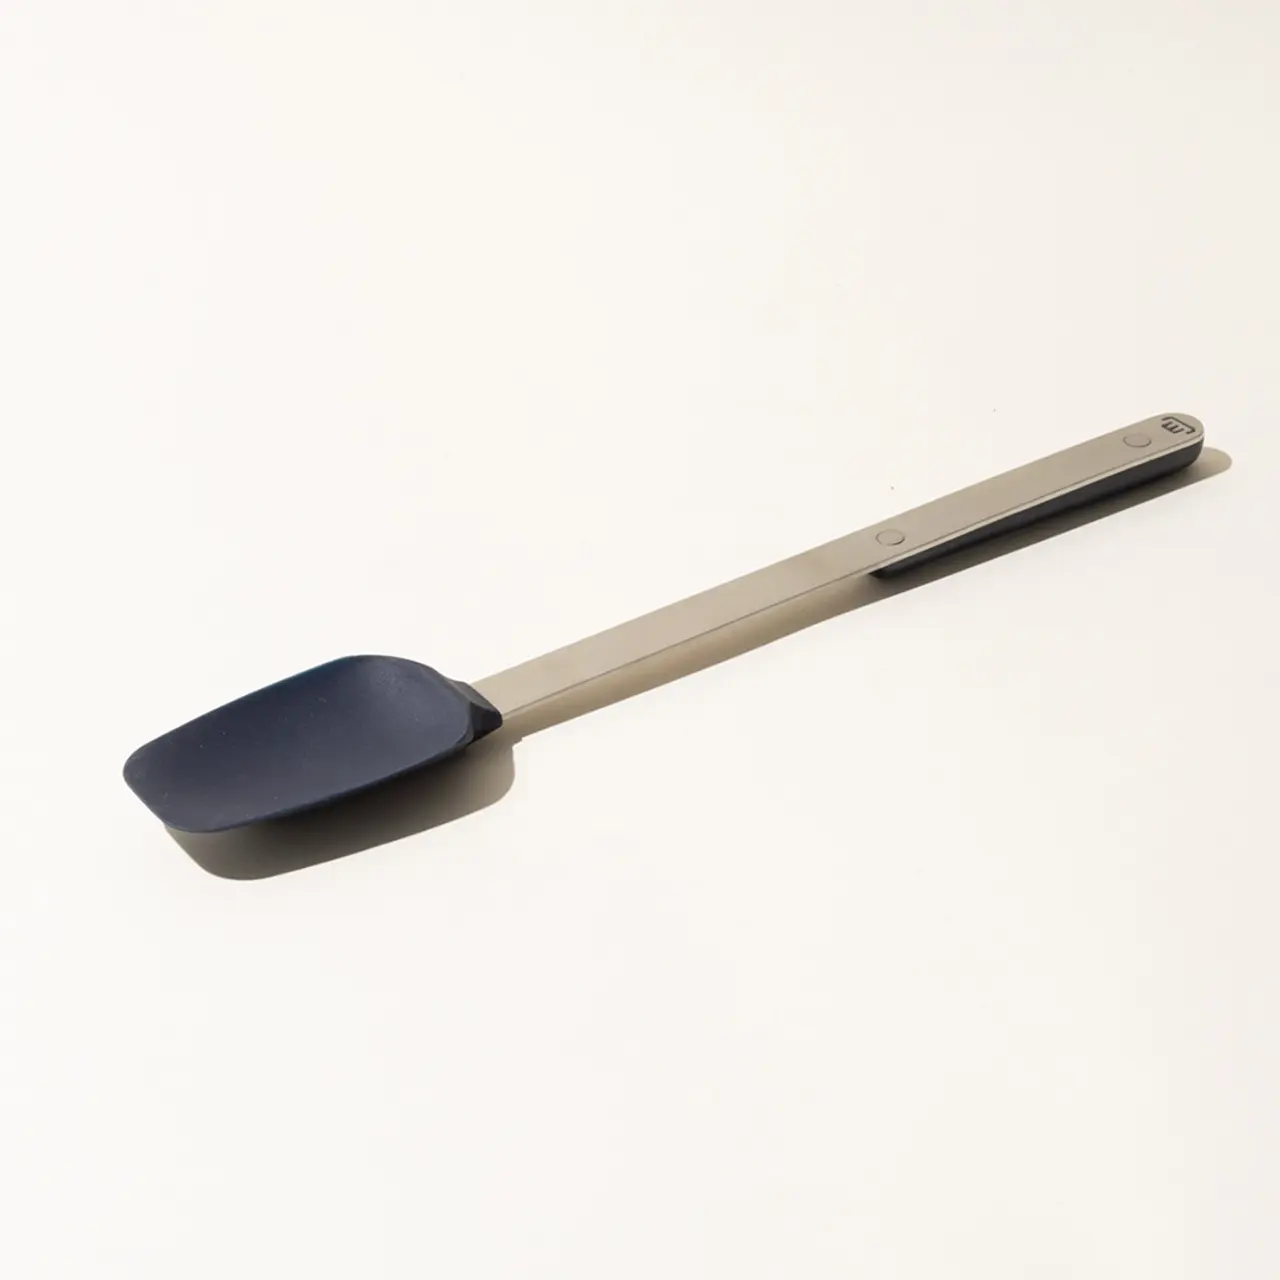 A silicone spatula with a long metal handle lies on a plain white surface.